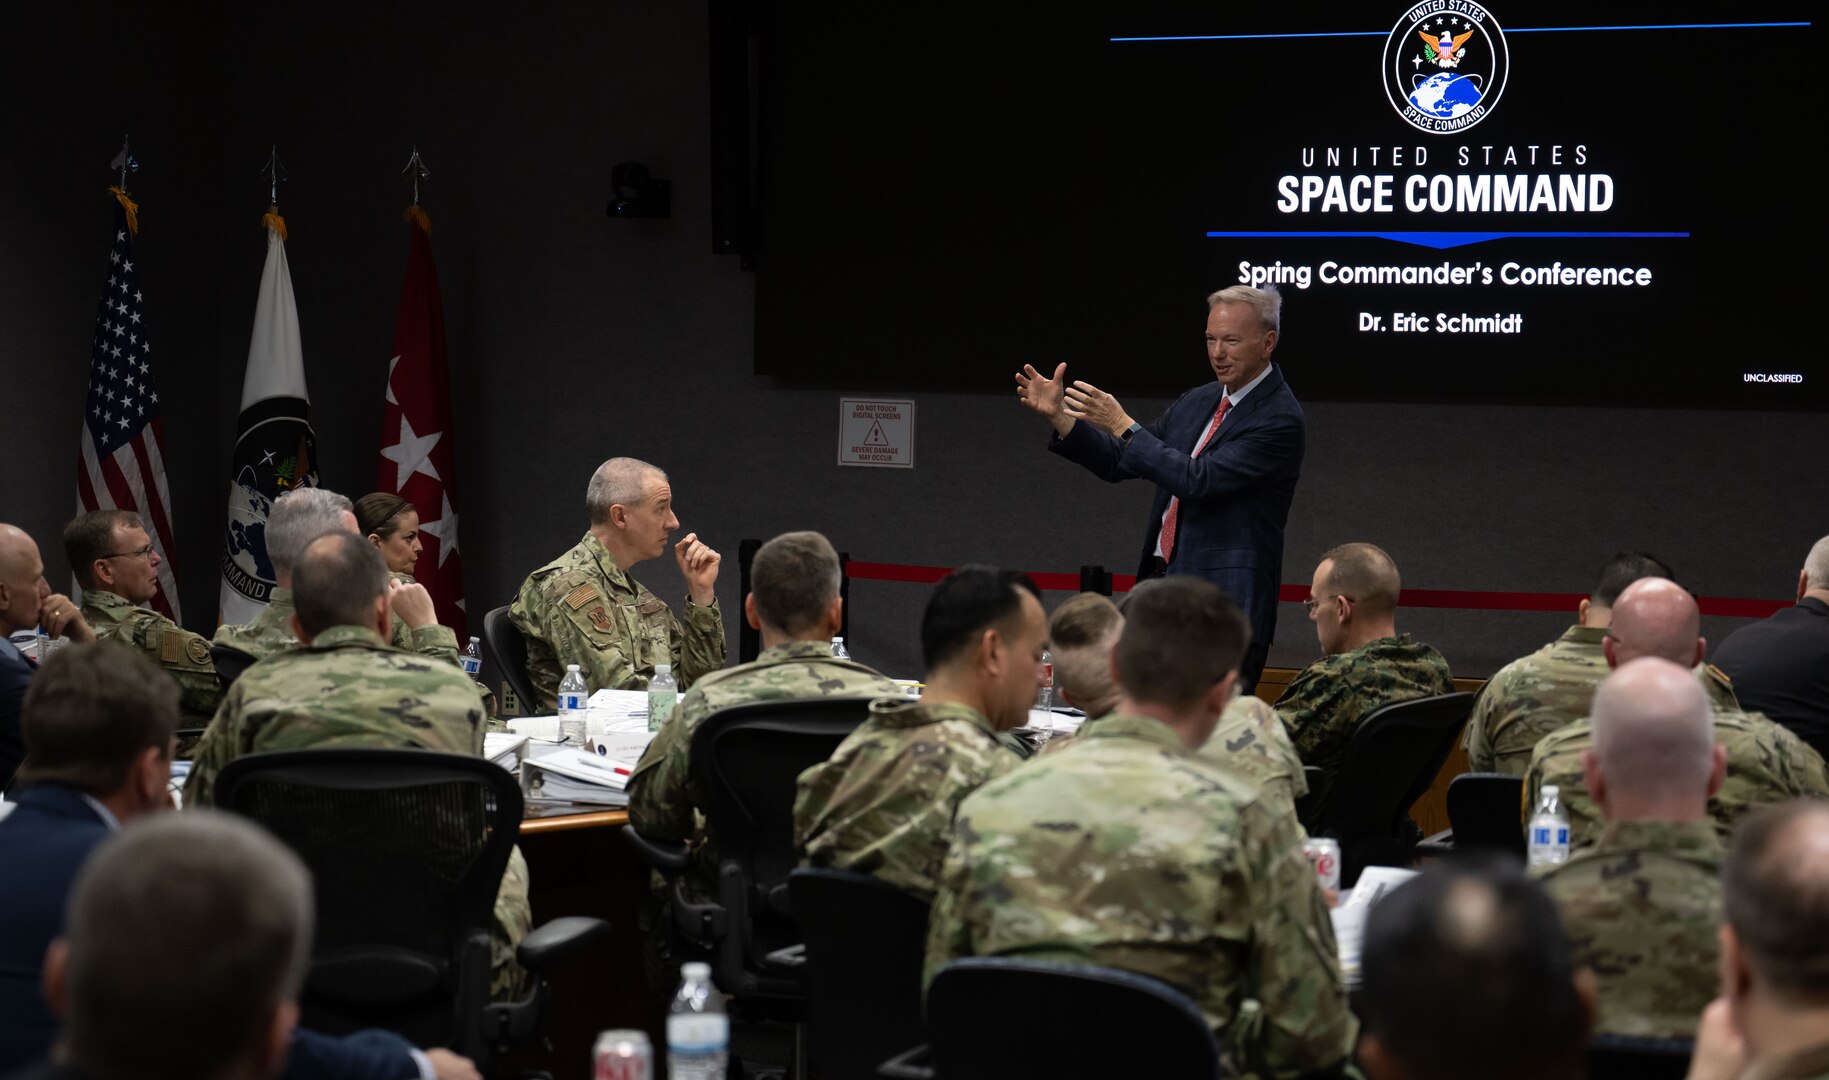 Dr. Eric Schmidt speaks to more than 70 senior leaders during day two of the three day USSPACECOM’s 2023 Spring Commander’s Conference at Peterson Space Force Base, Colo., March 15, 2023. Dr. Schmidt discussed in detail the future of technology in warfare, moving at the speed of pacing threats and the potential role of artificial intelligence for space and its effect on integrated deterrence. (USSPACECOM Photo by John Ayre)